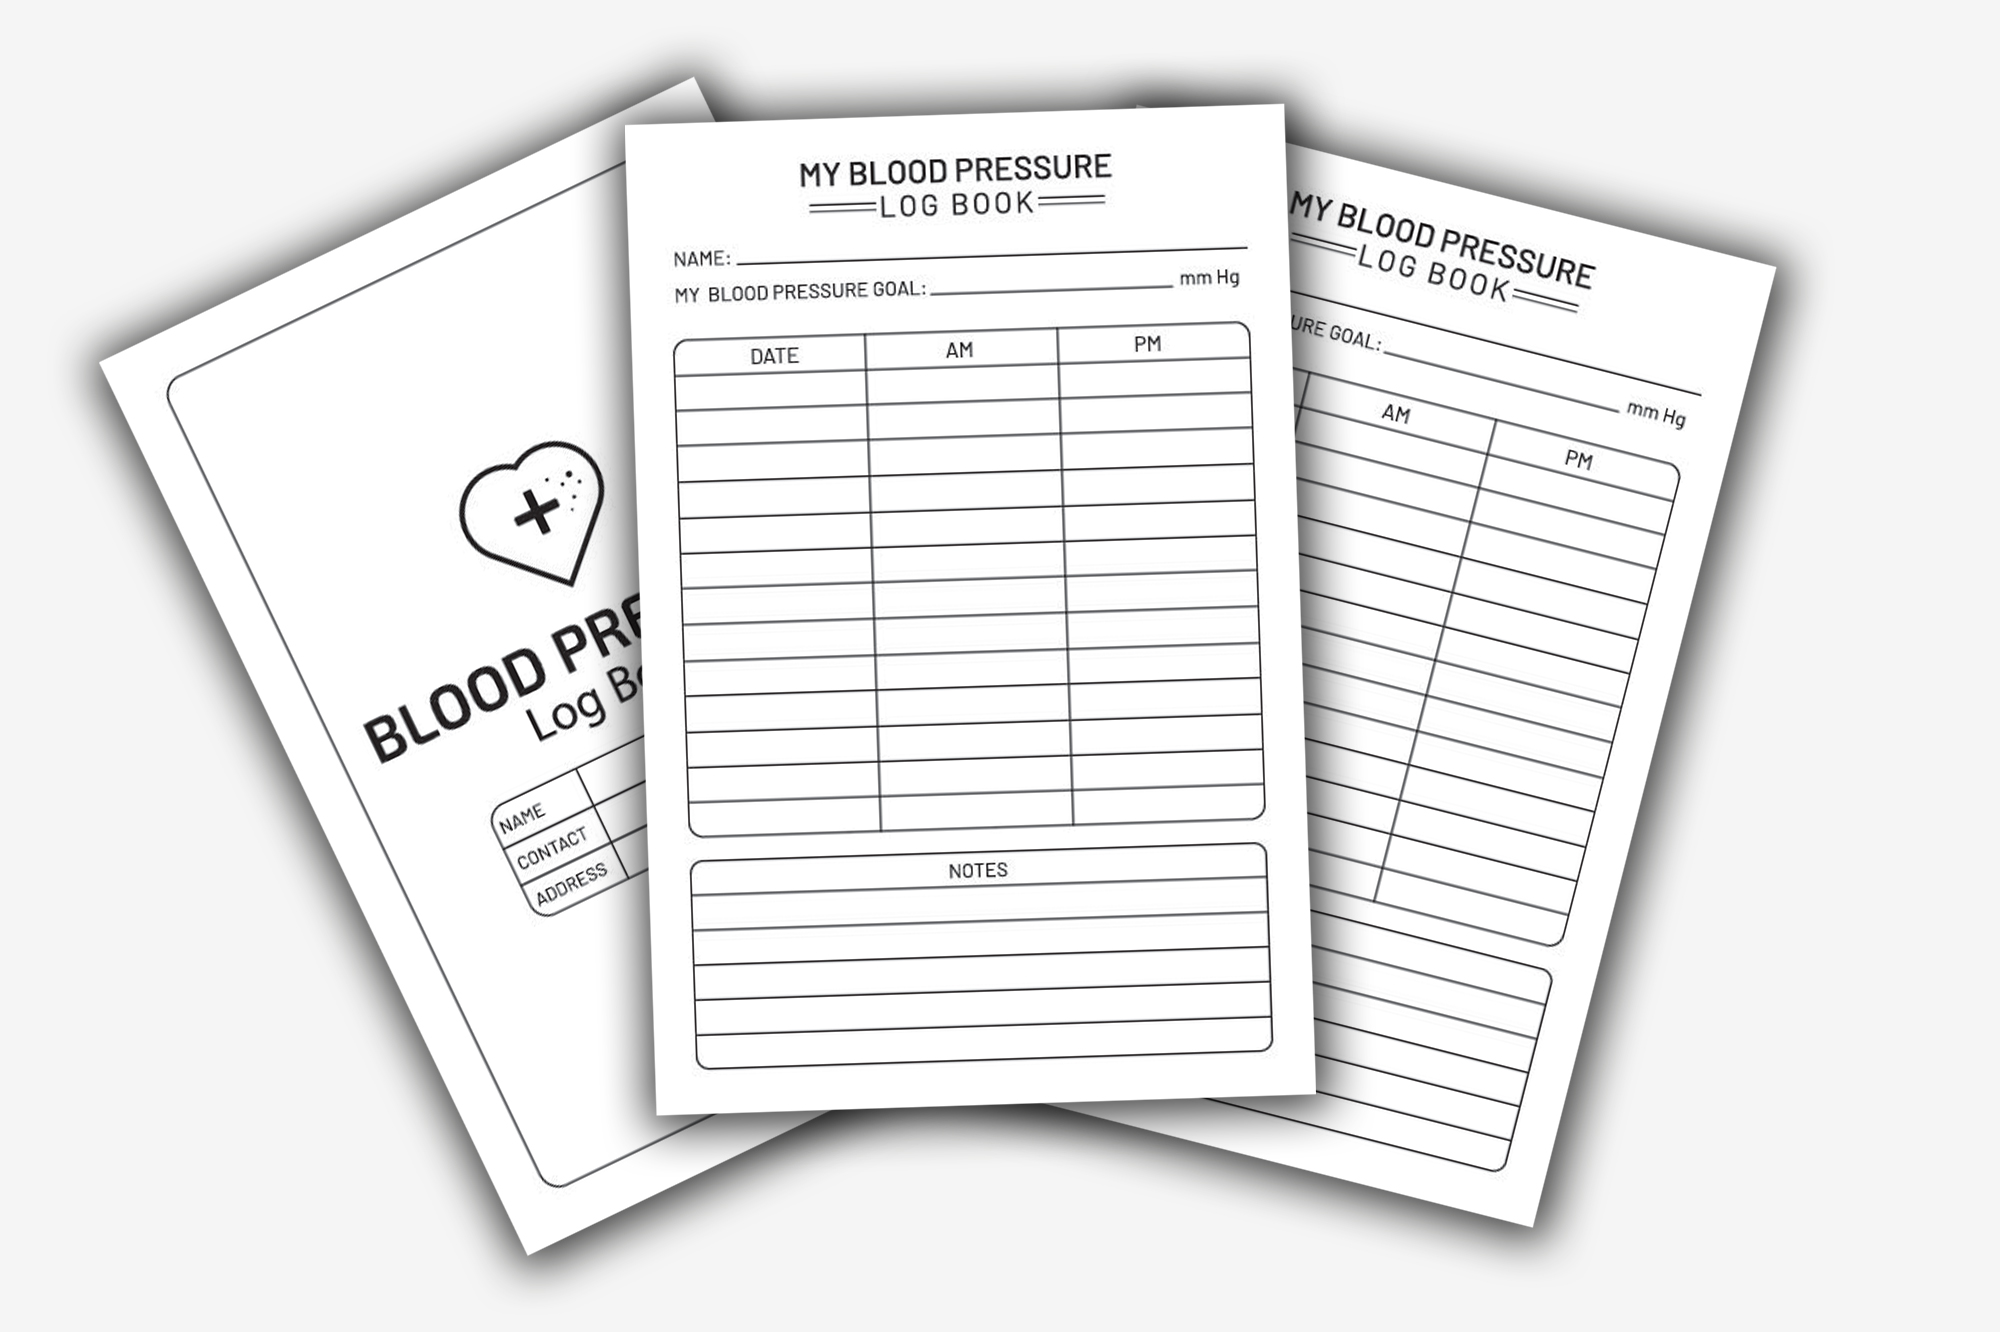 Three sheets of paper with blood pressure labels on them.